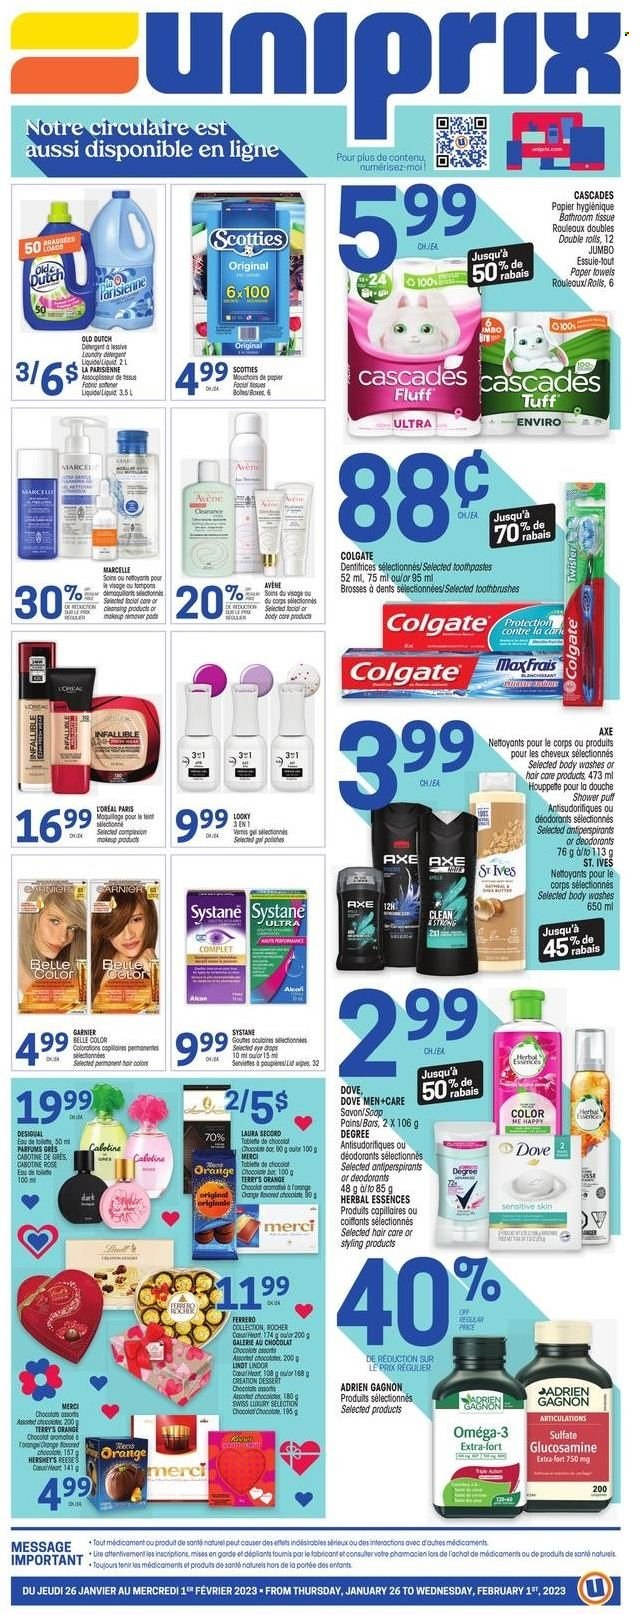 thumbnail - Uniprix Flyer - January 26, 2023 - February 01, 2023 - Sales products - Dove, Reese's, Hershey's, Merci, chocolate bar, Koo, wipes, bath tissue, kitchen towels, paper towels, L’Oréal, Herbal Essences, Axe, makeup, glucosamine, Omega-3, eye drops, detergent, Colgate, Garnier, Systane, Lindt, Lindor, Ferrero Rocher, deodorant. Page 1.